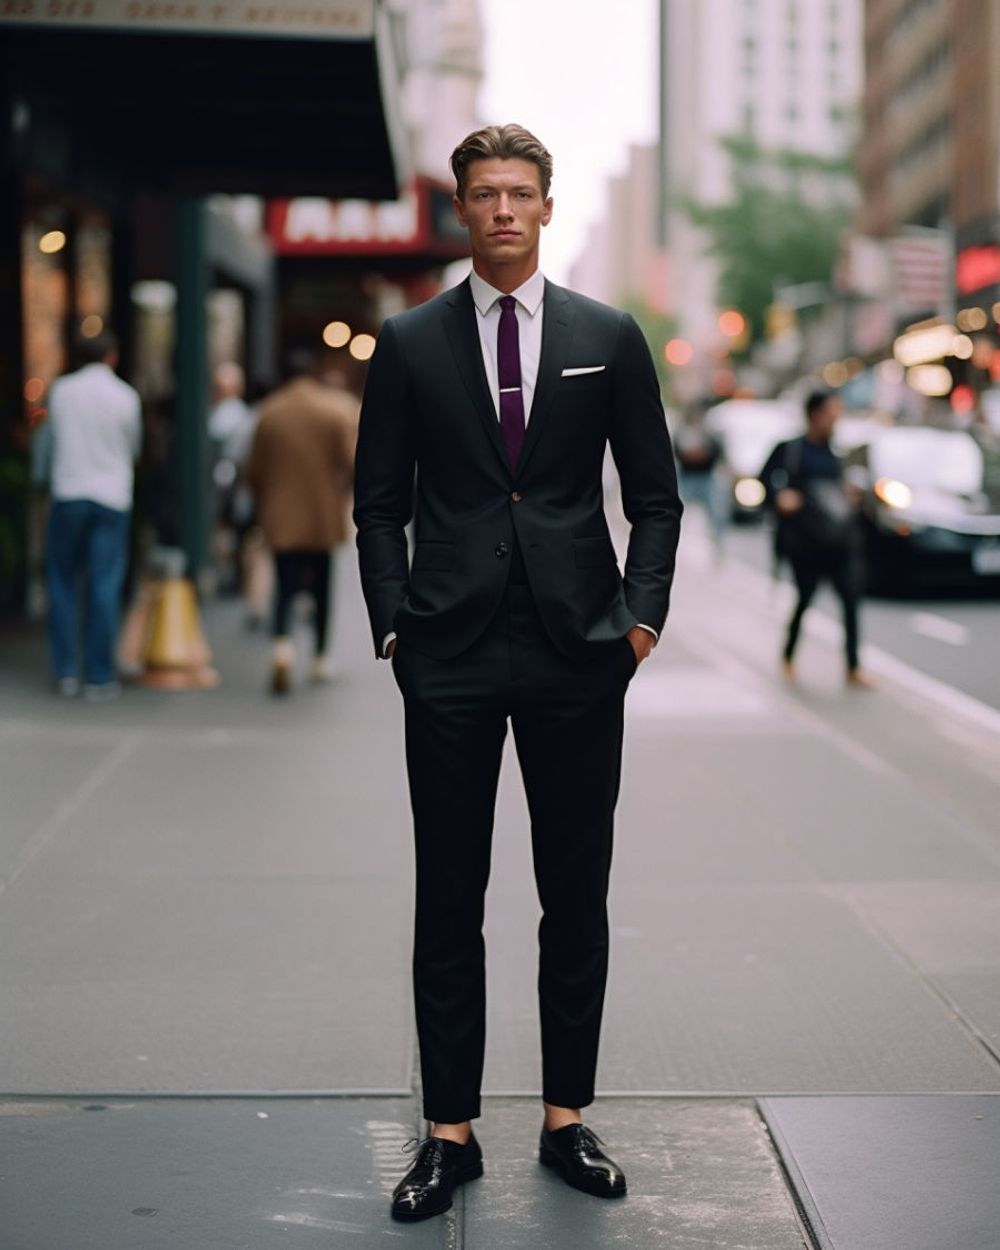 How to choose the perfect shoes for your suit?